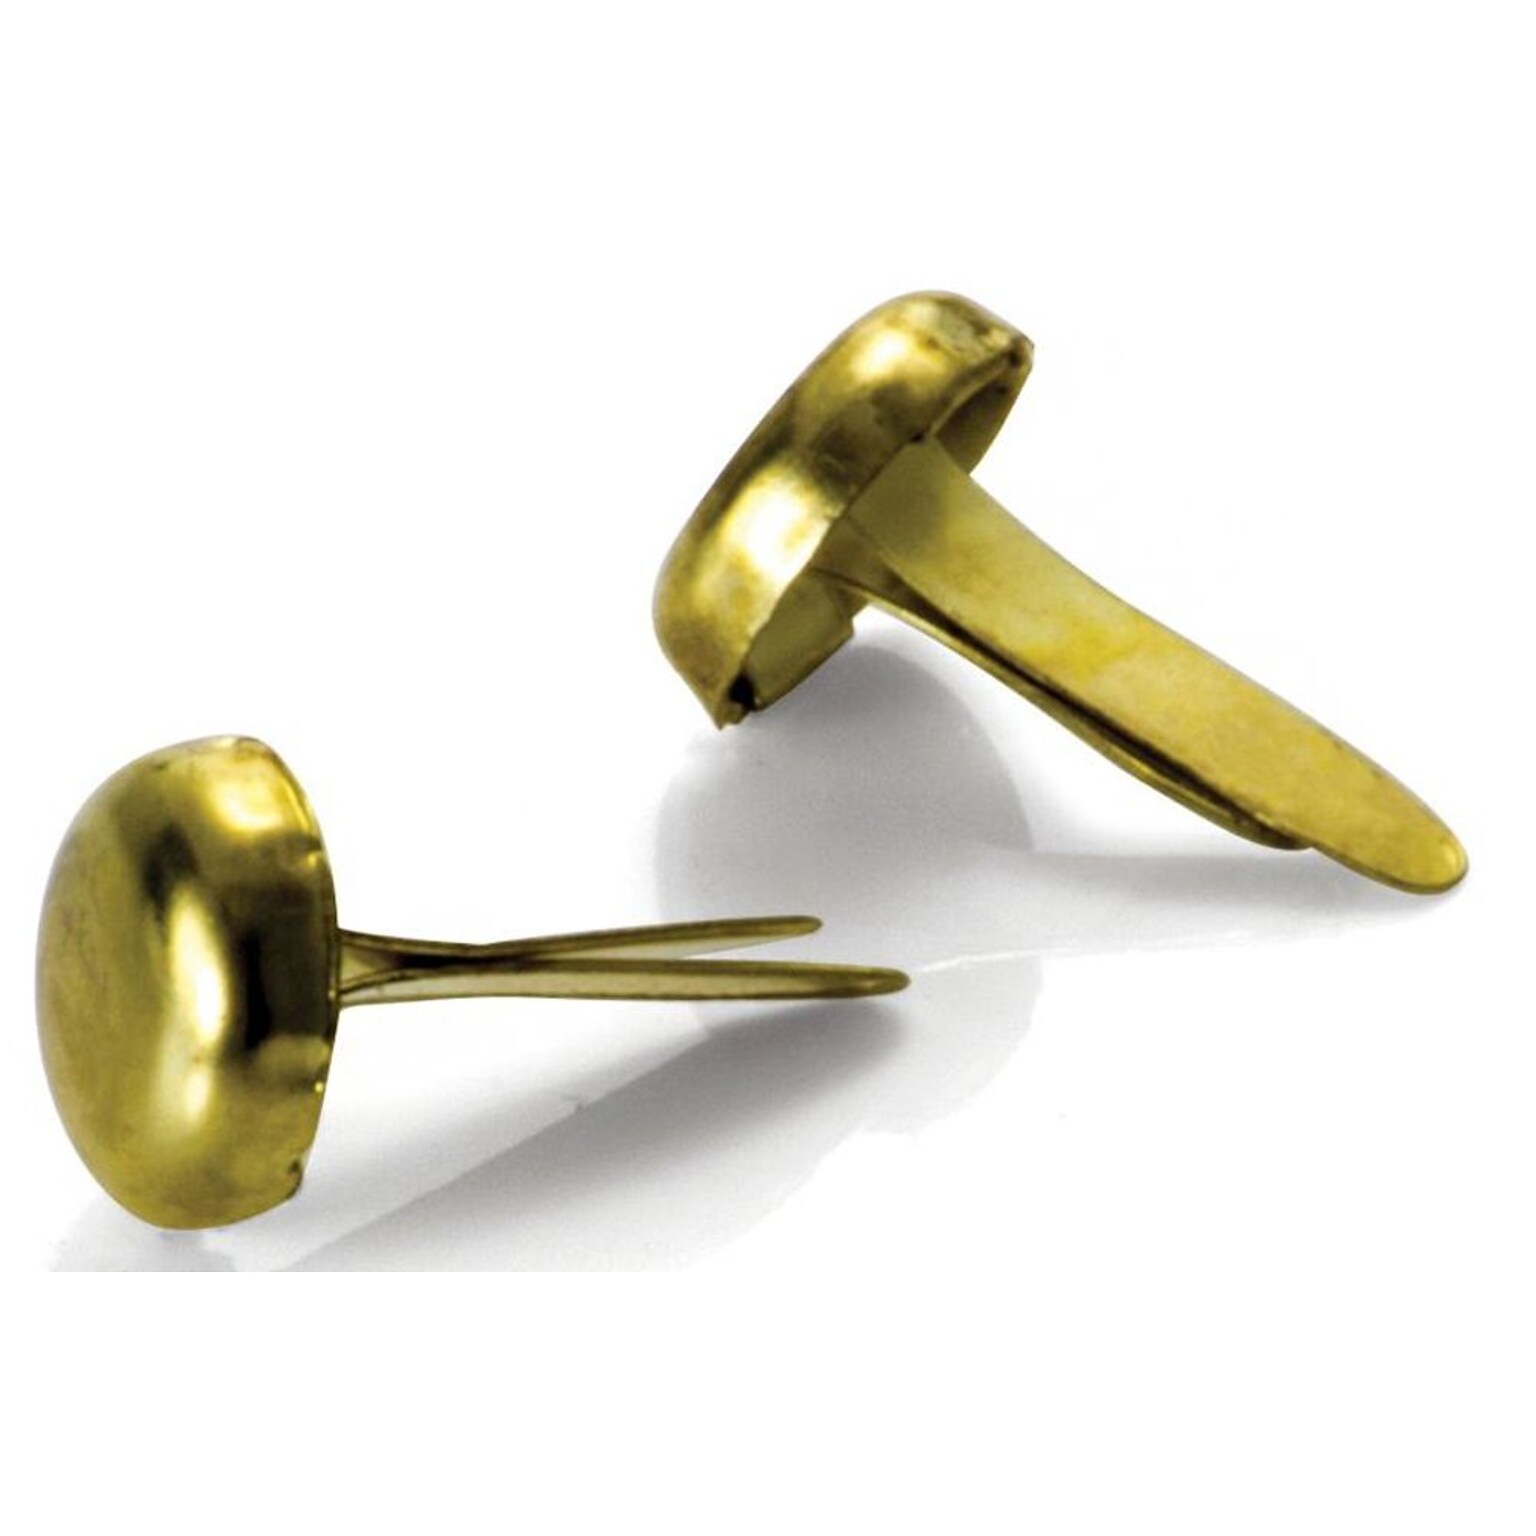 Officemate Round Head Fasteners, 1/2 Shank, Brass, 100/Box (OIC99802)